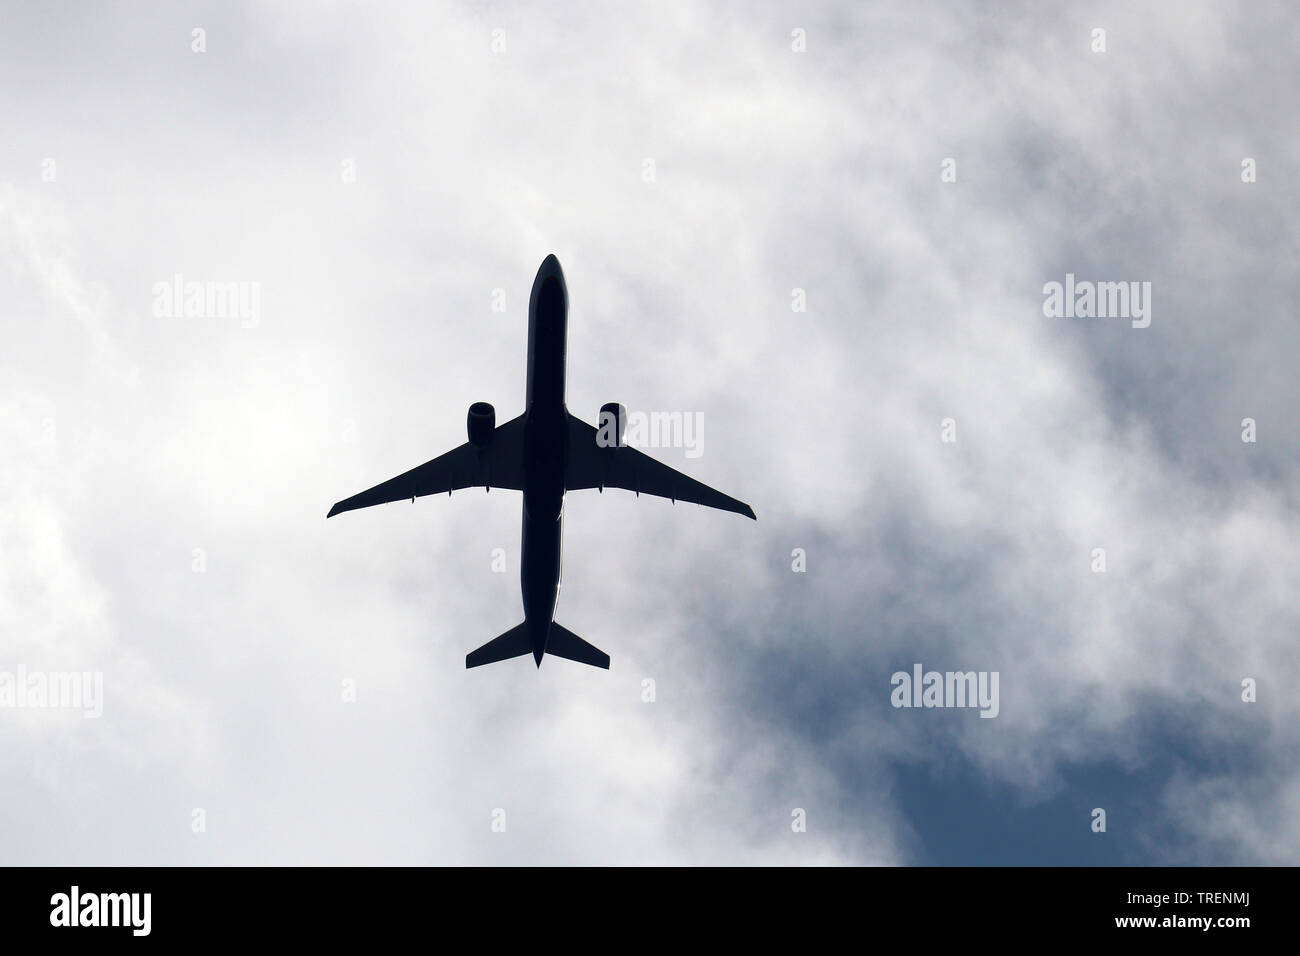 Airplane silhouette in the sky close up. Commercial plane taking off on background of white clouds Stock Photo